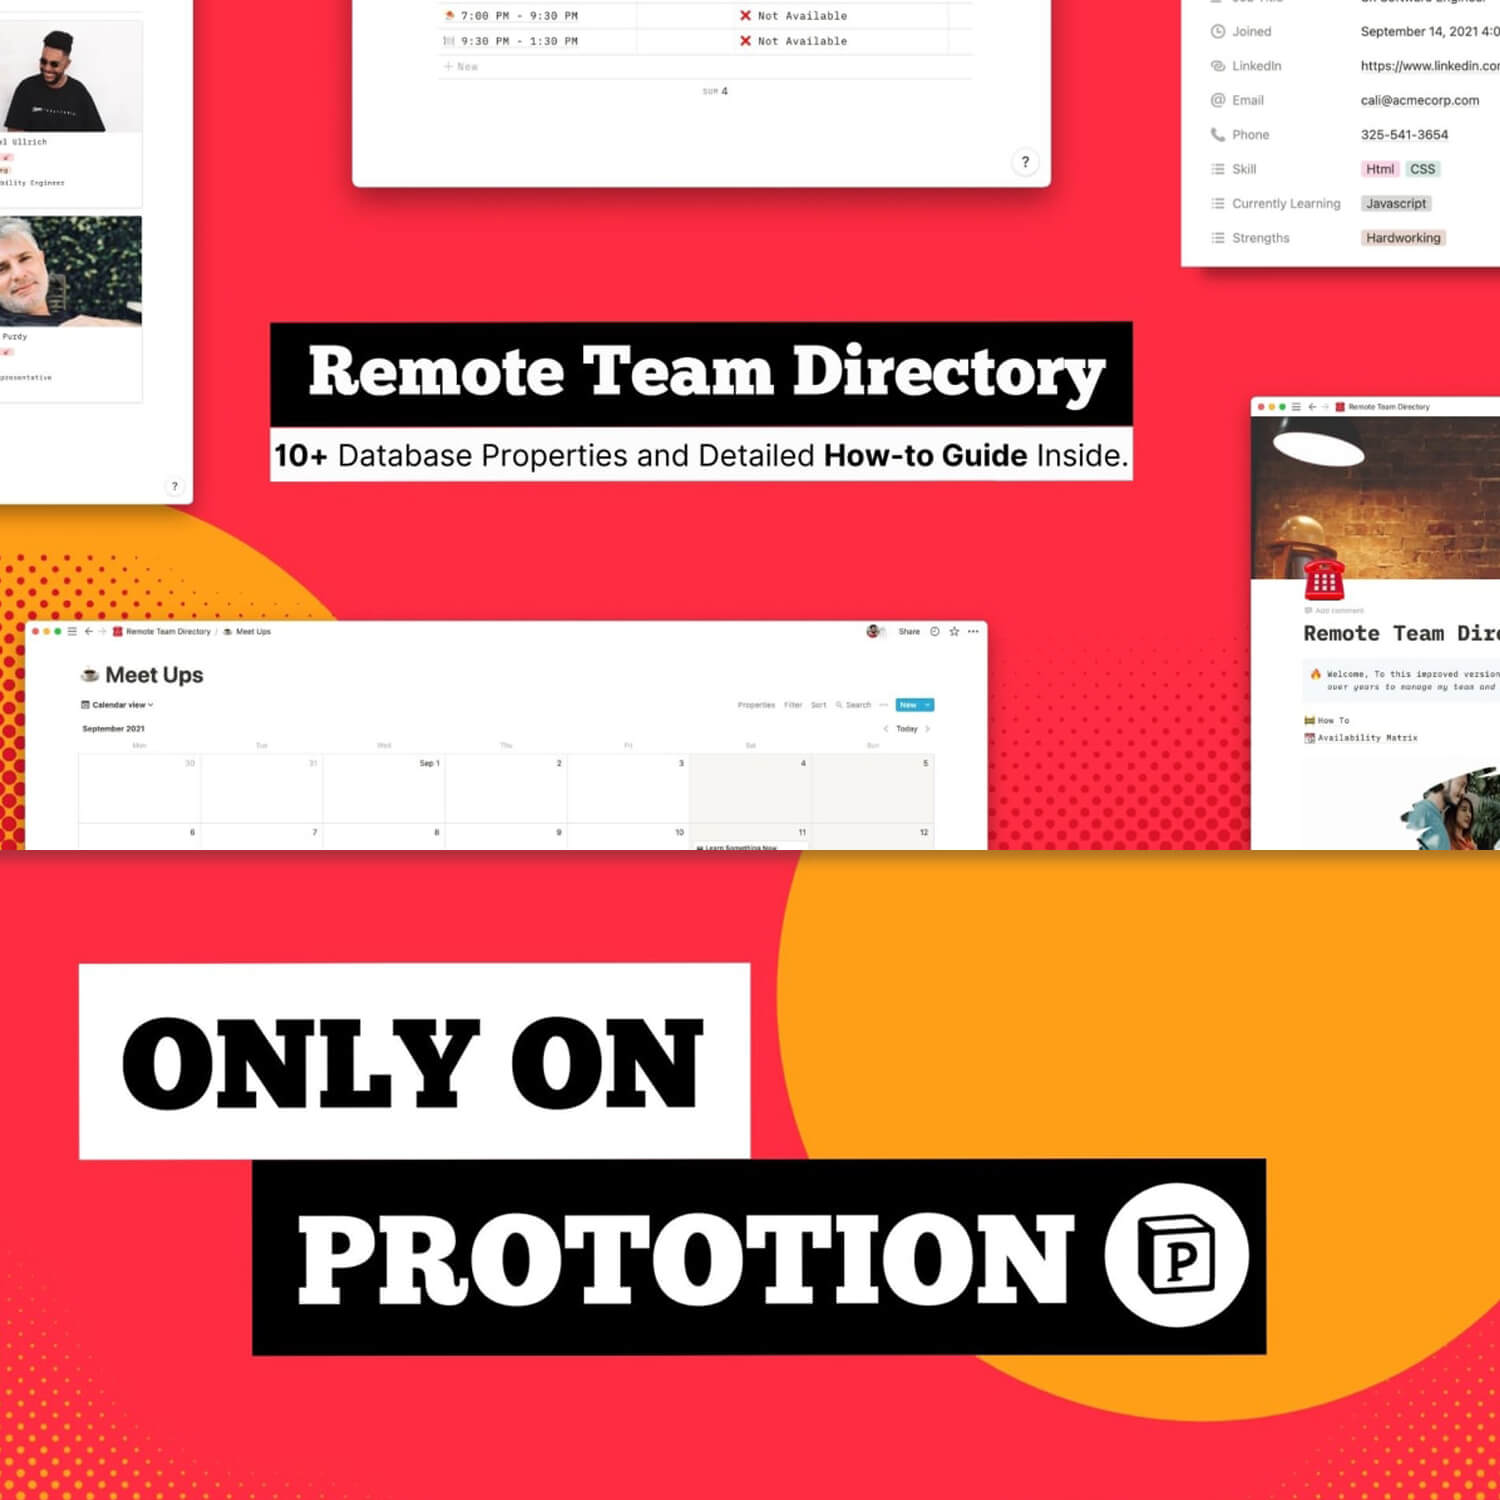 Meet Ups of Remote Team Directory.